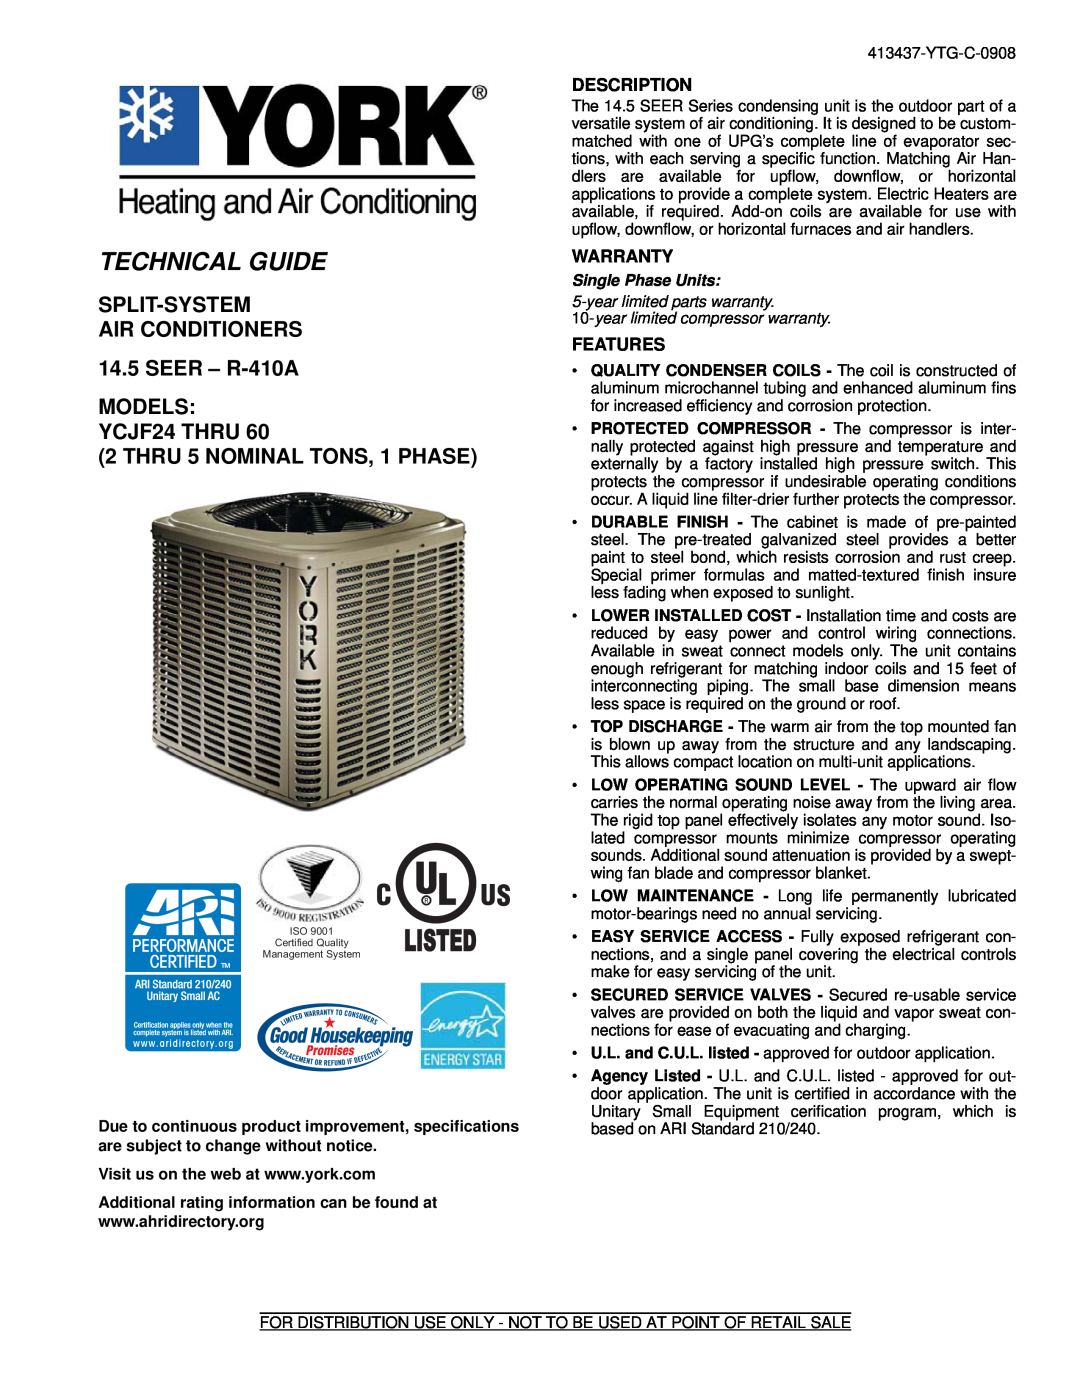 York warranty Technical Guide, SPLIT-SYSTEM AIR CONDITIONERS 14.5 SEER - R-410A, MODELS YCJF24 THRU, Single Phase Units 